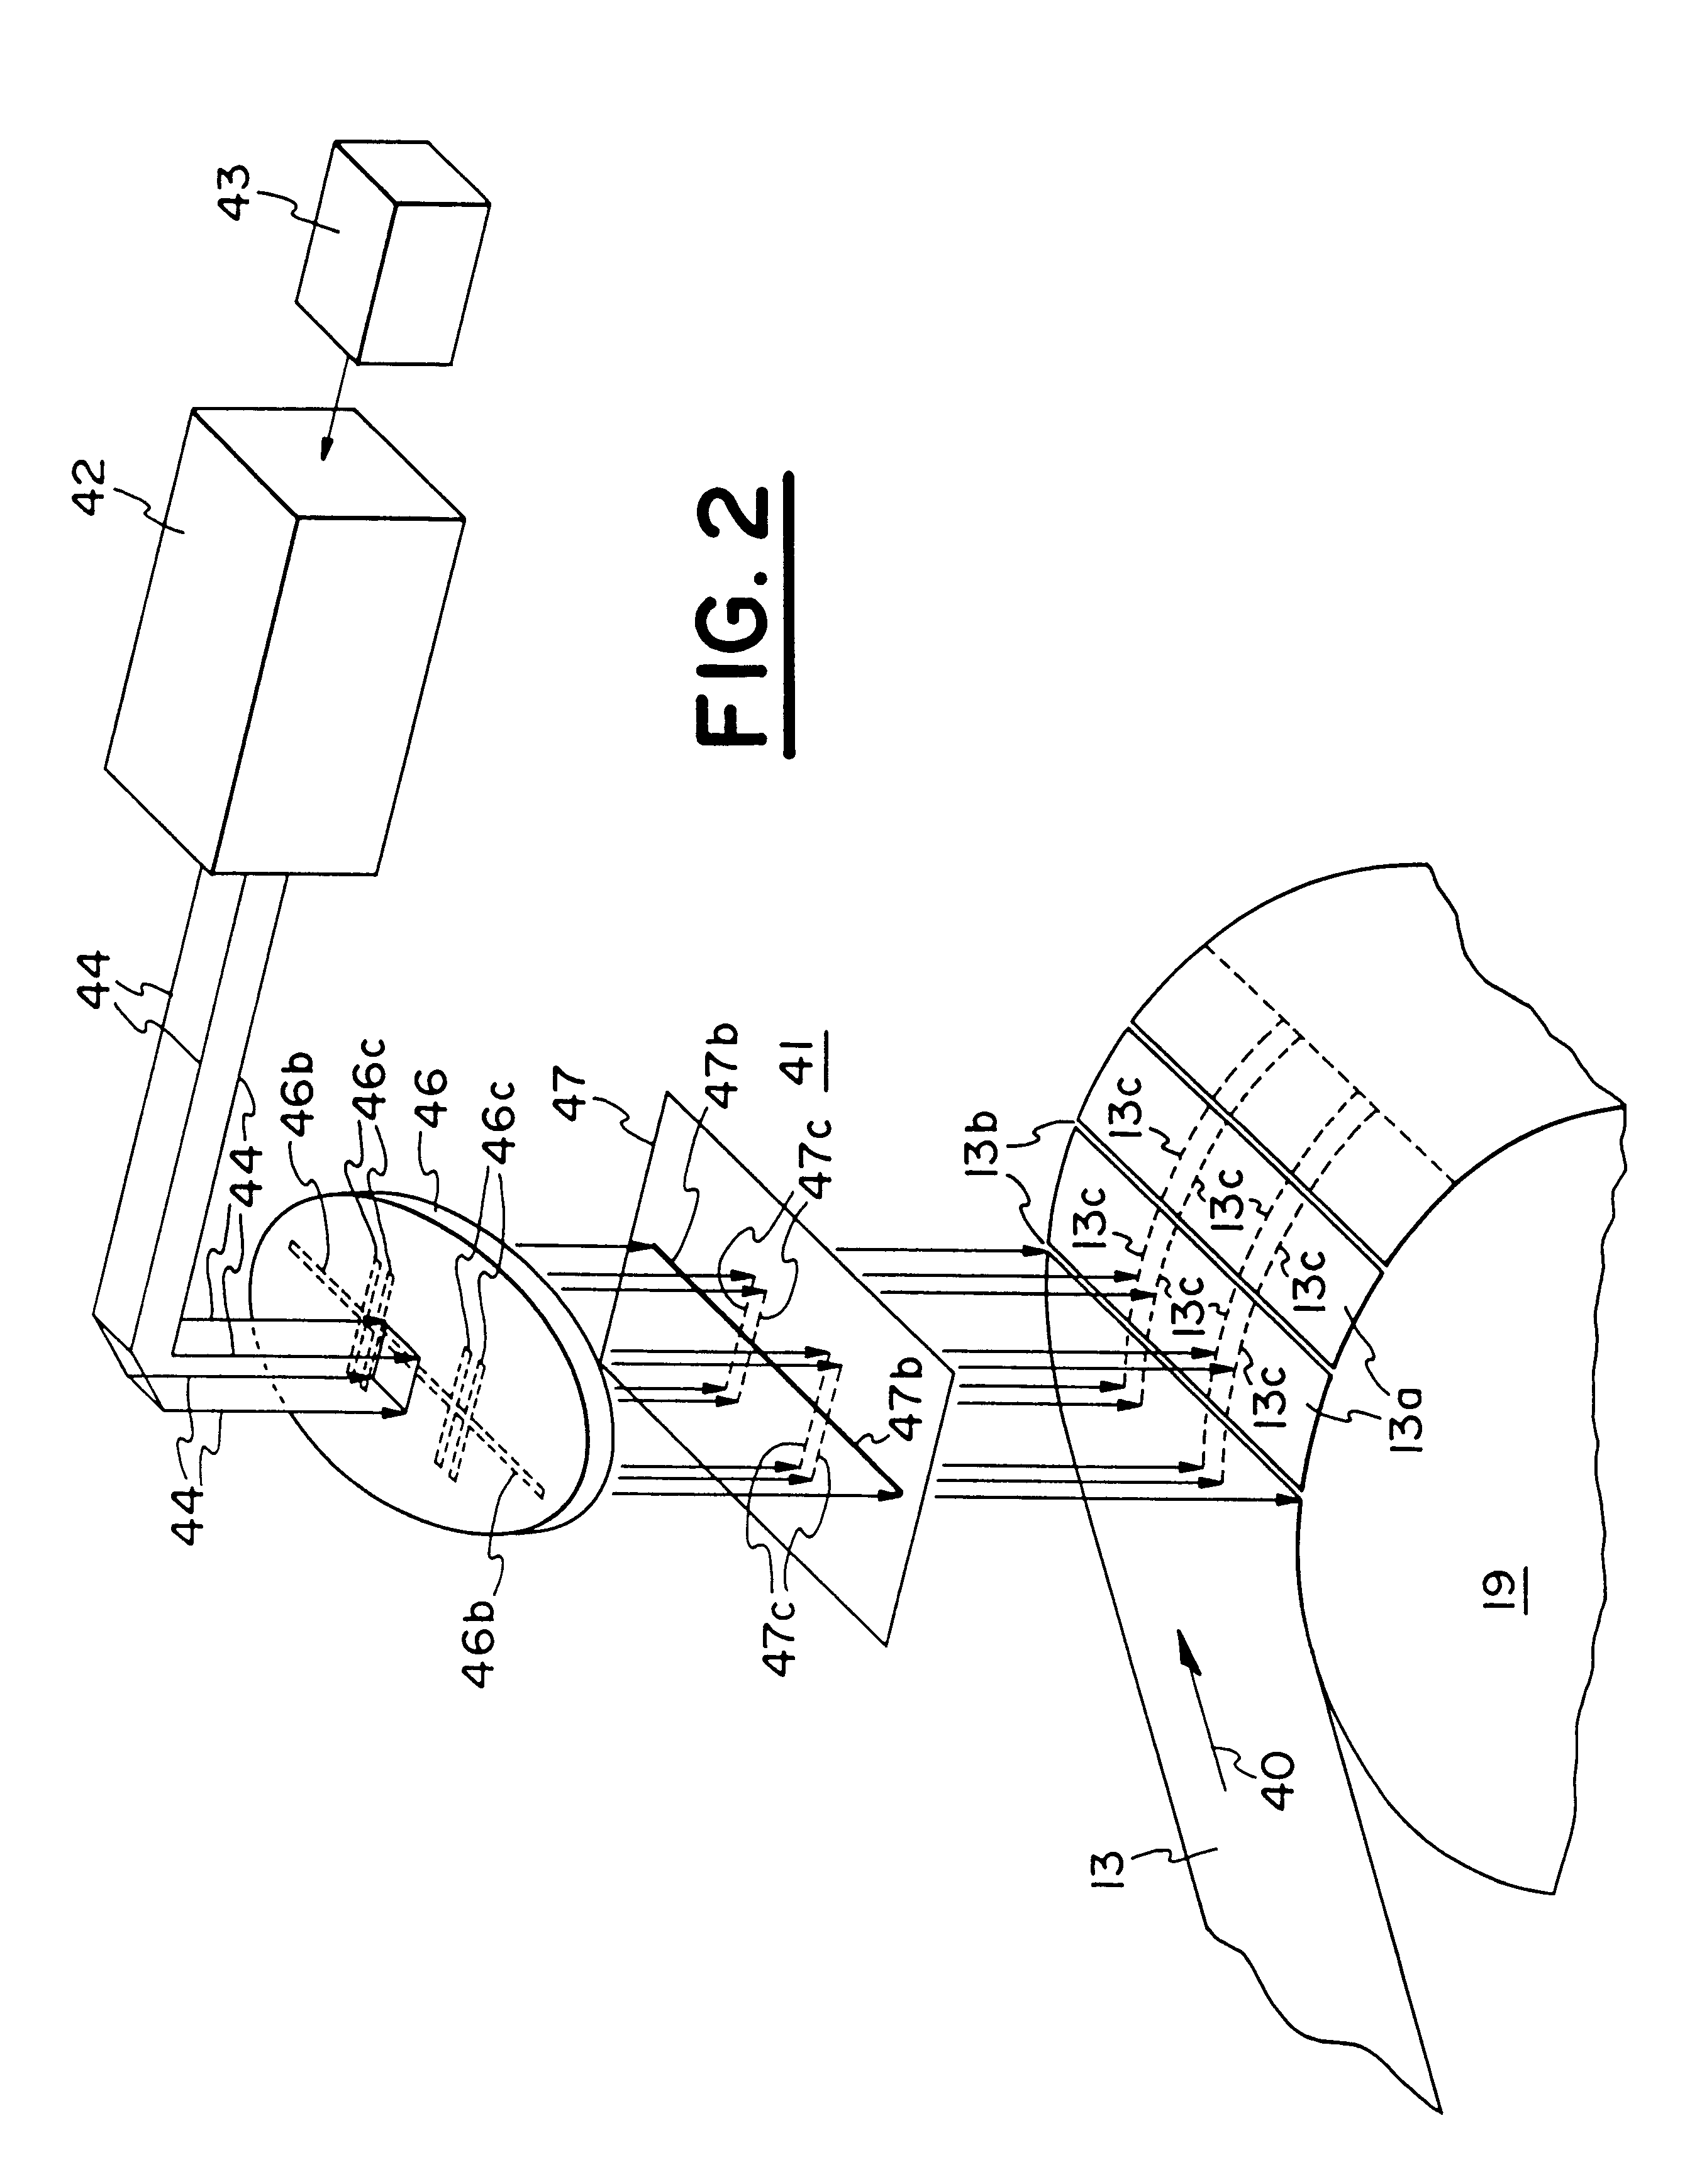 Method of and apparatus in a filter tipping machine for manipulating a web